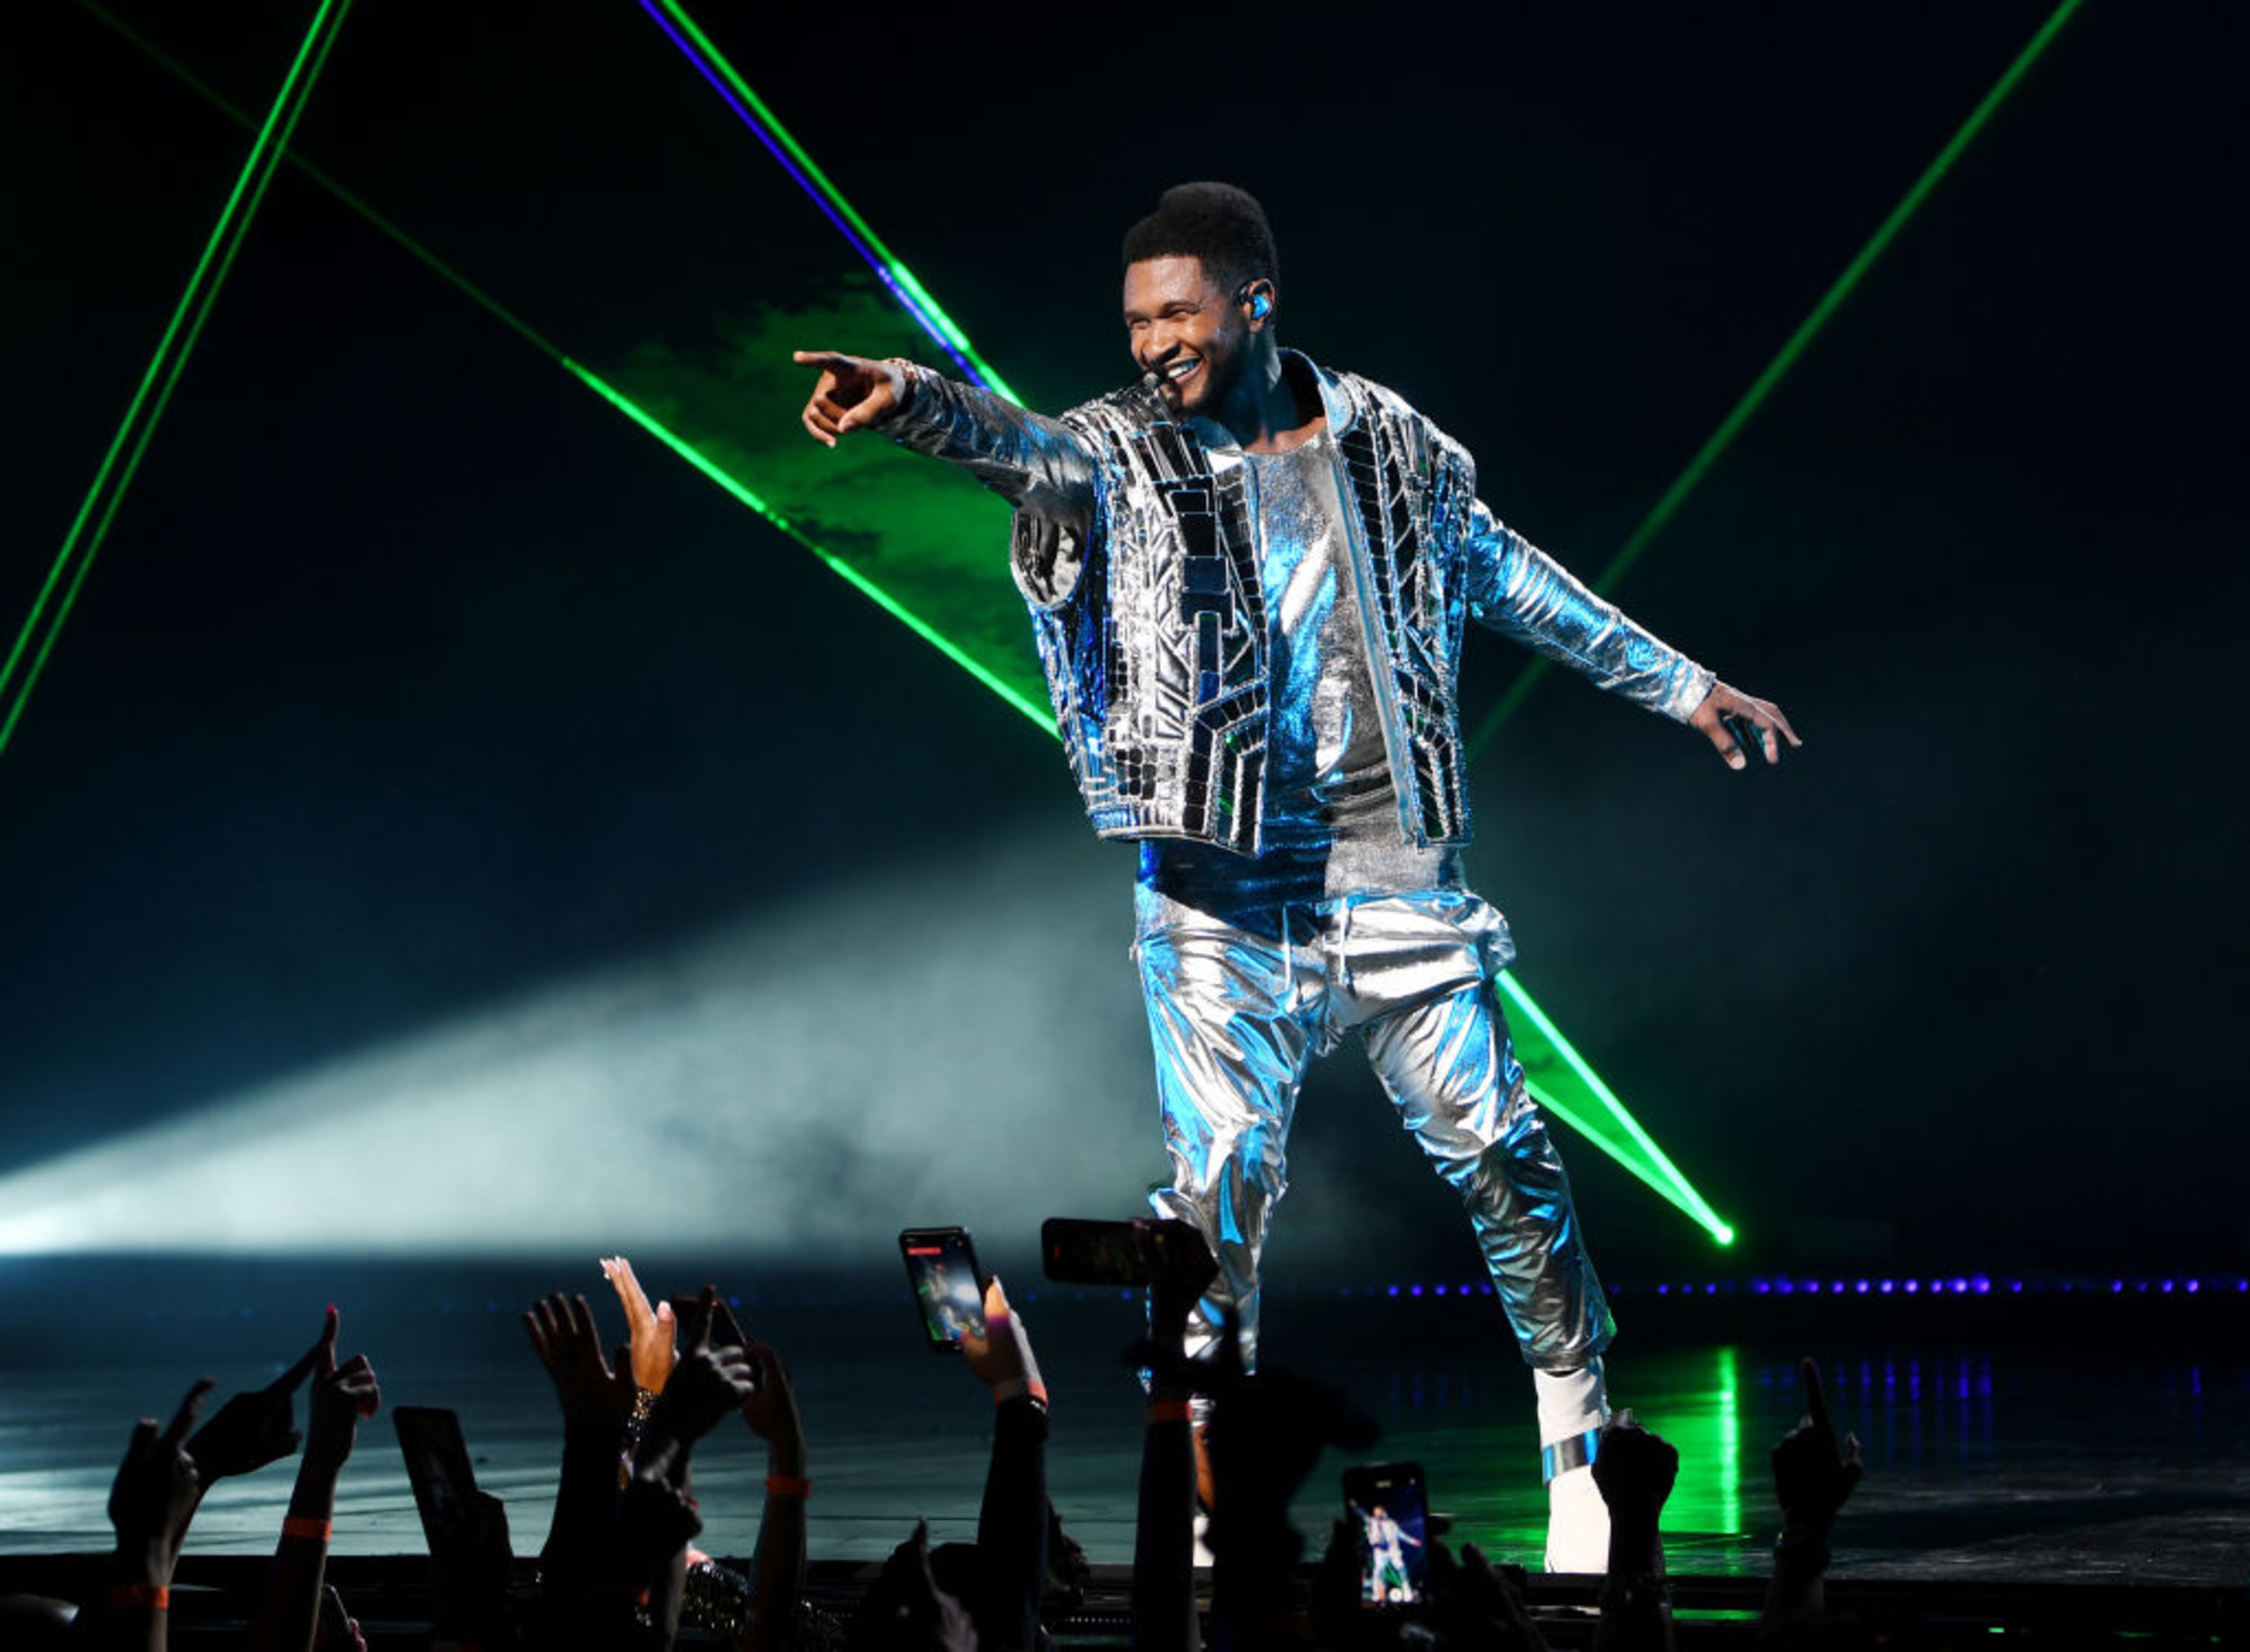 <p>2024 might be the year of Usher. After being crowned the king of Las Vegas due to his three-year sold-out residency at Caesar’s Palace and MGM Dolby Live, in late 2023 the NFL announced Usher as the halftime show performer for Super Bowl LVIII. Shortly after the halftime news, Usher announced he would be releasing his ninth album <em>Coming Home,</em> and embarking on a worldwide tour. By the way, <a href="https://www.msn.com/en-us/news/other/super-bowl-halftime-shows-of-21st-century-ranked/ss-BB1j22Gz">Usher's halftime performance at SB LVIII was a rousing success</a>.</p><p>You may also like: <a href='https://www.yardbarker.com/entertainment/articles/the_25_greatest_opening_lines_to_songs_022924/s1__39107121'>The 25 greatest opening lines to songs</a></p>